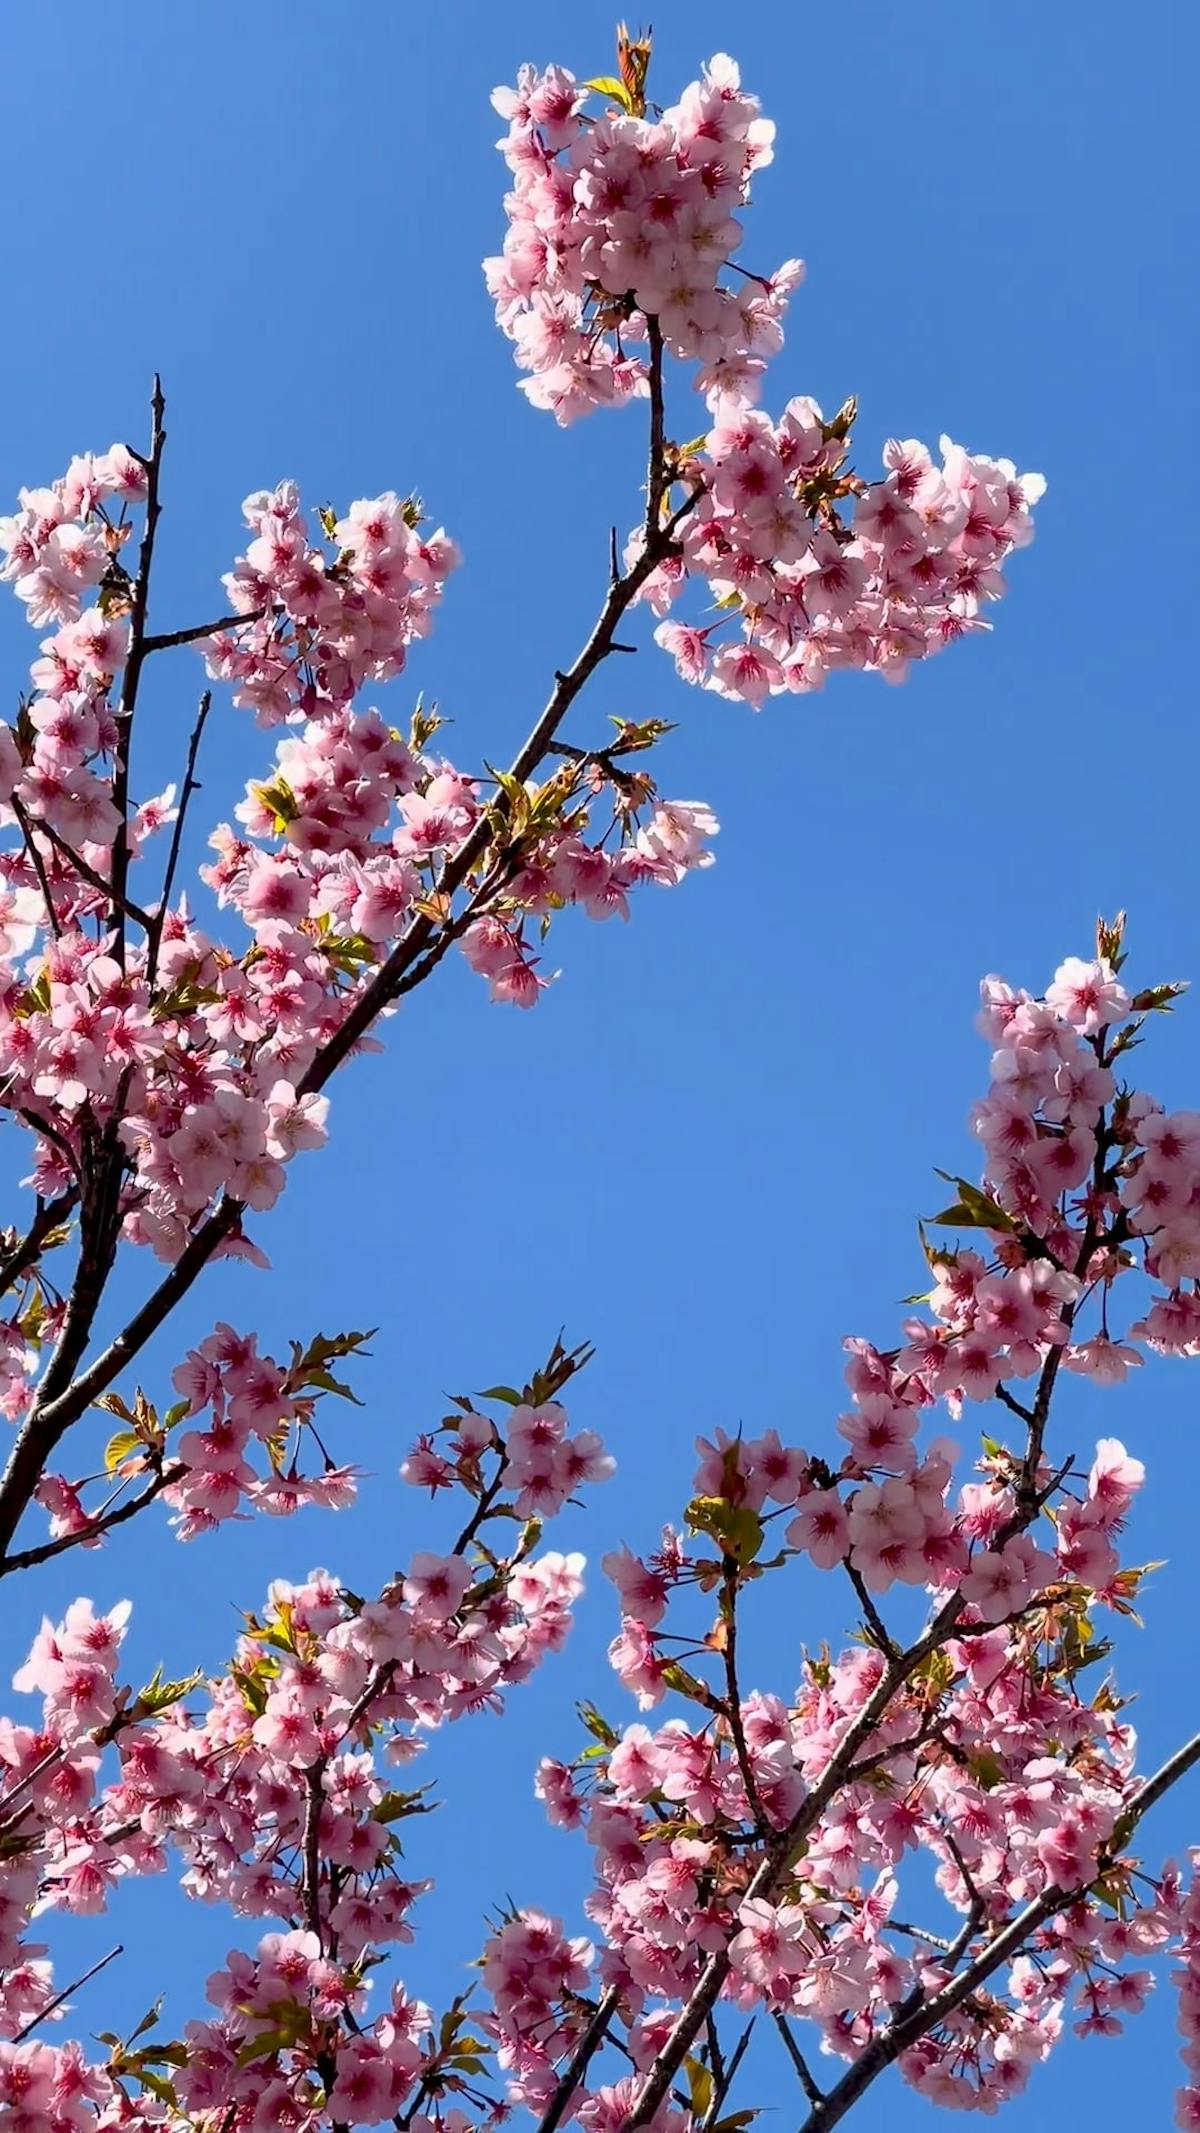 A View of Cherry Blossoms flowers Free Stock Video Footage, Royalty ...